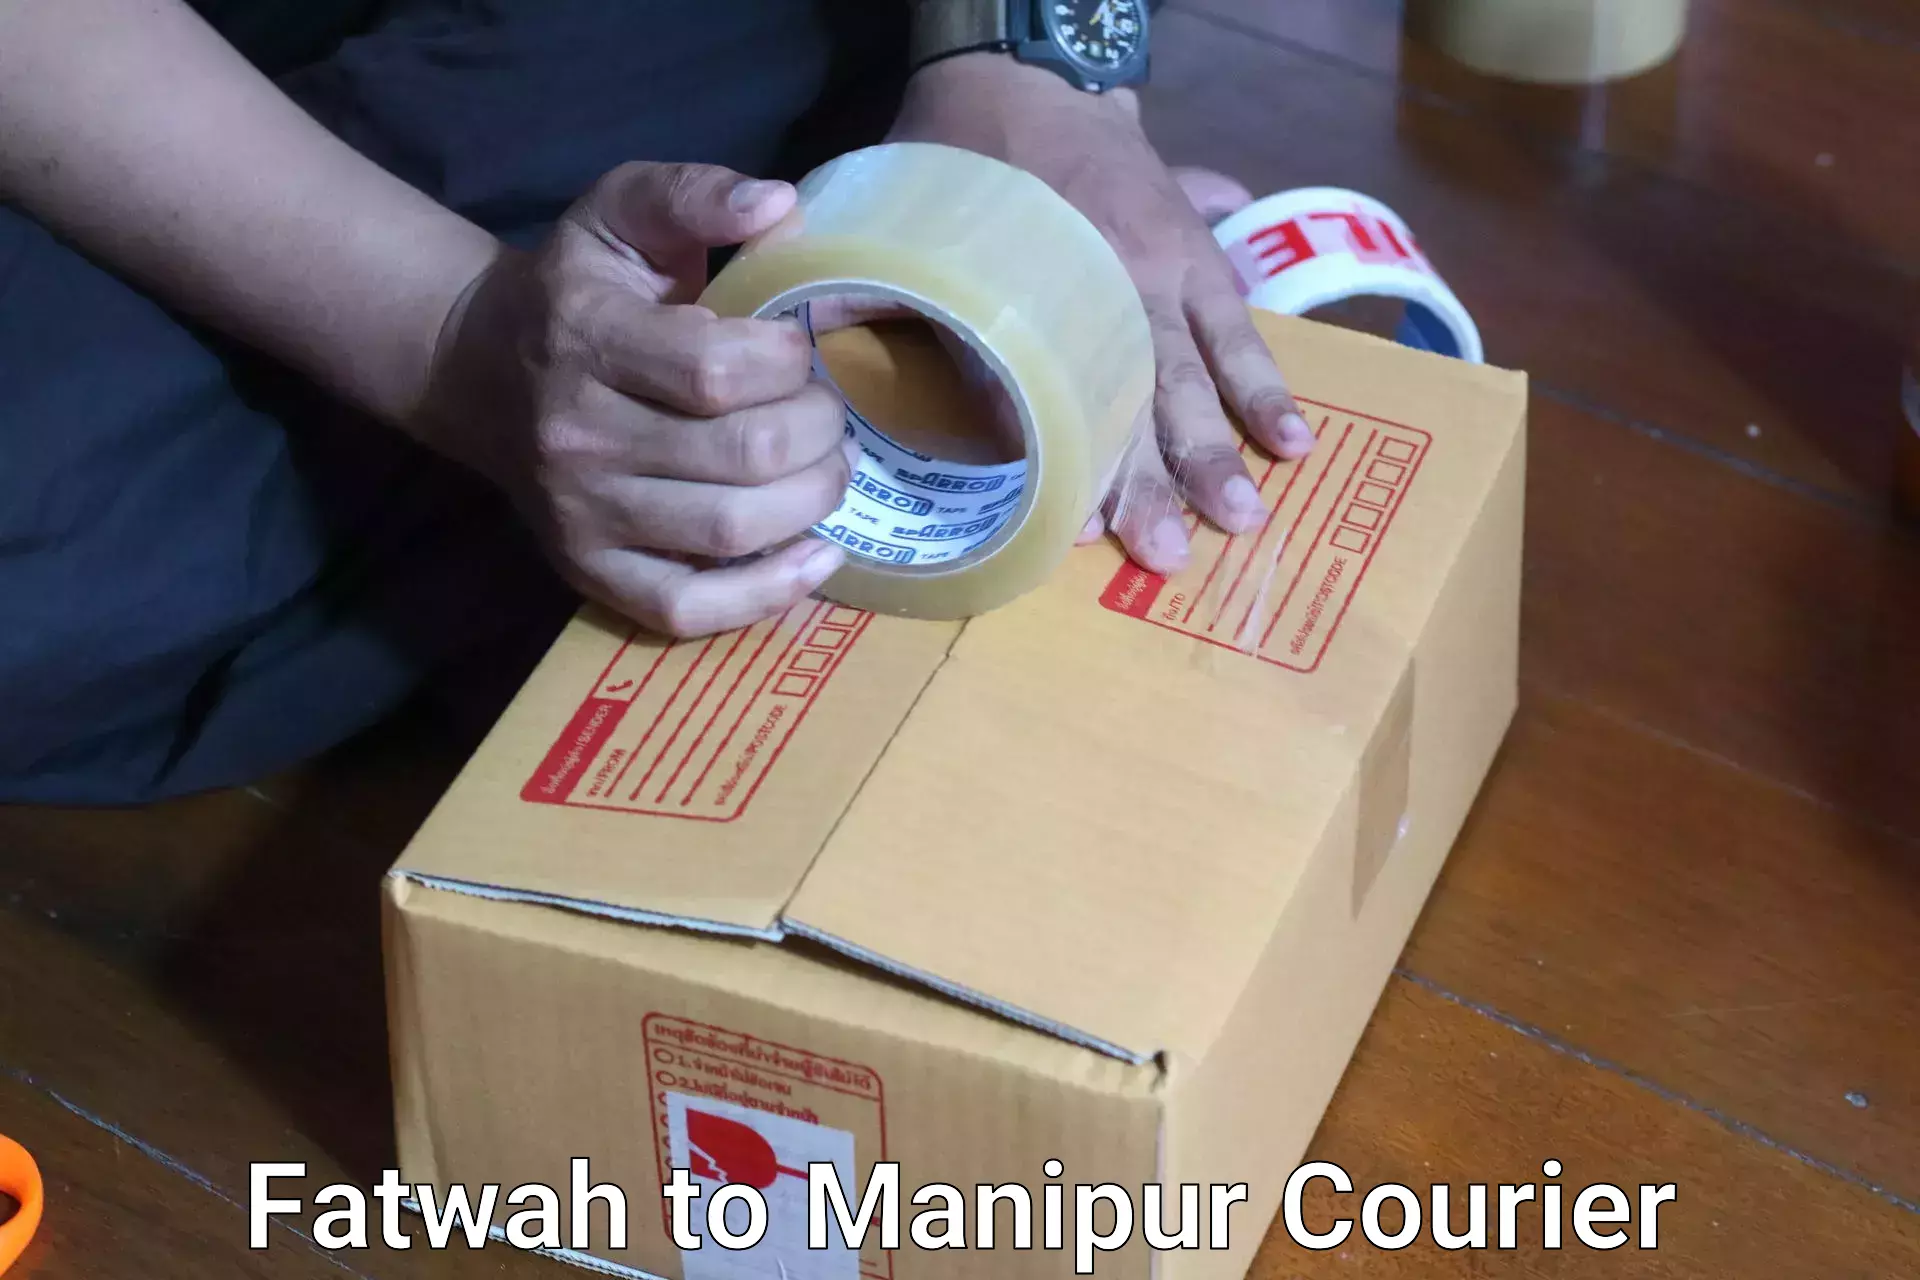 Luggage shipment specialists Fatwah to Manipur